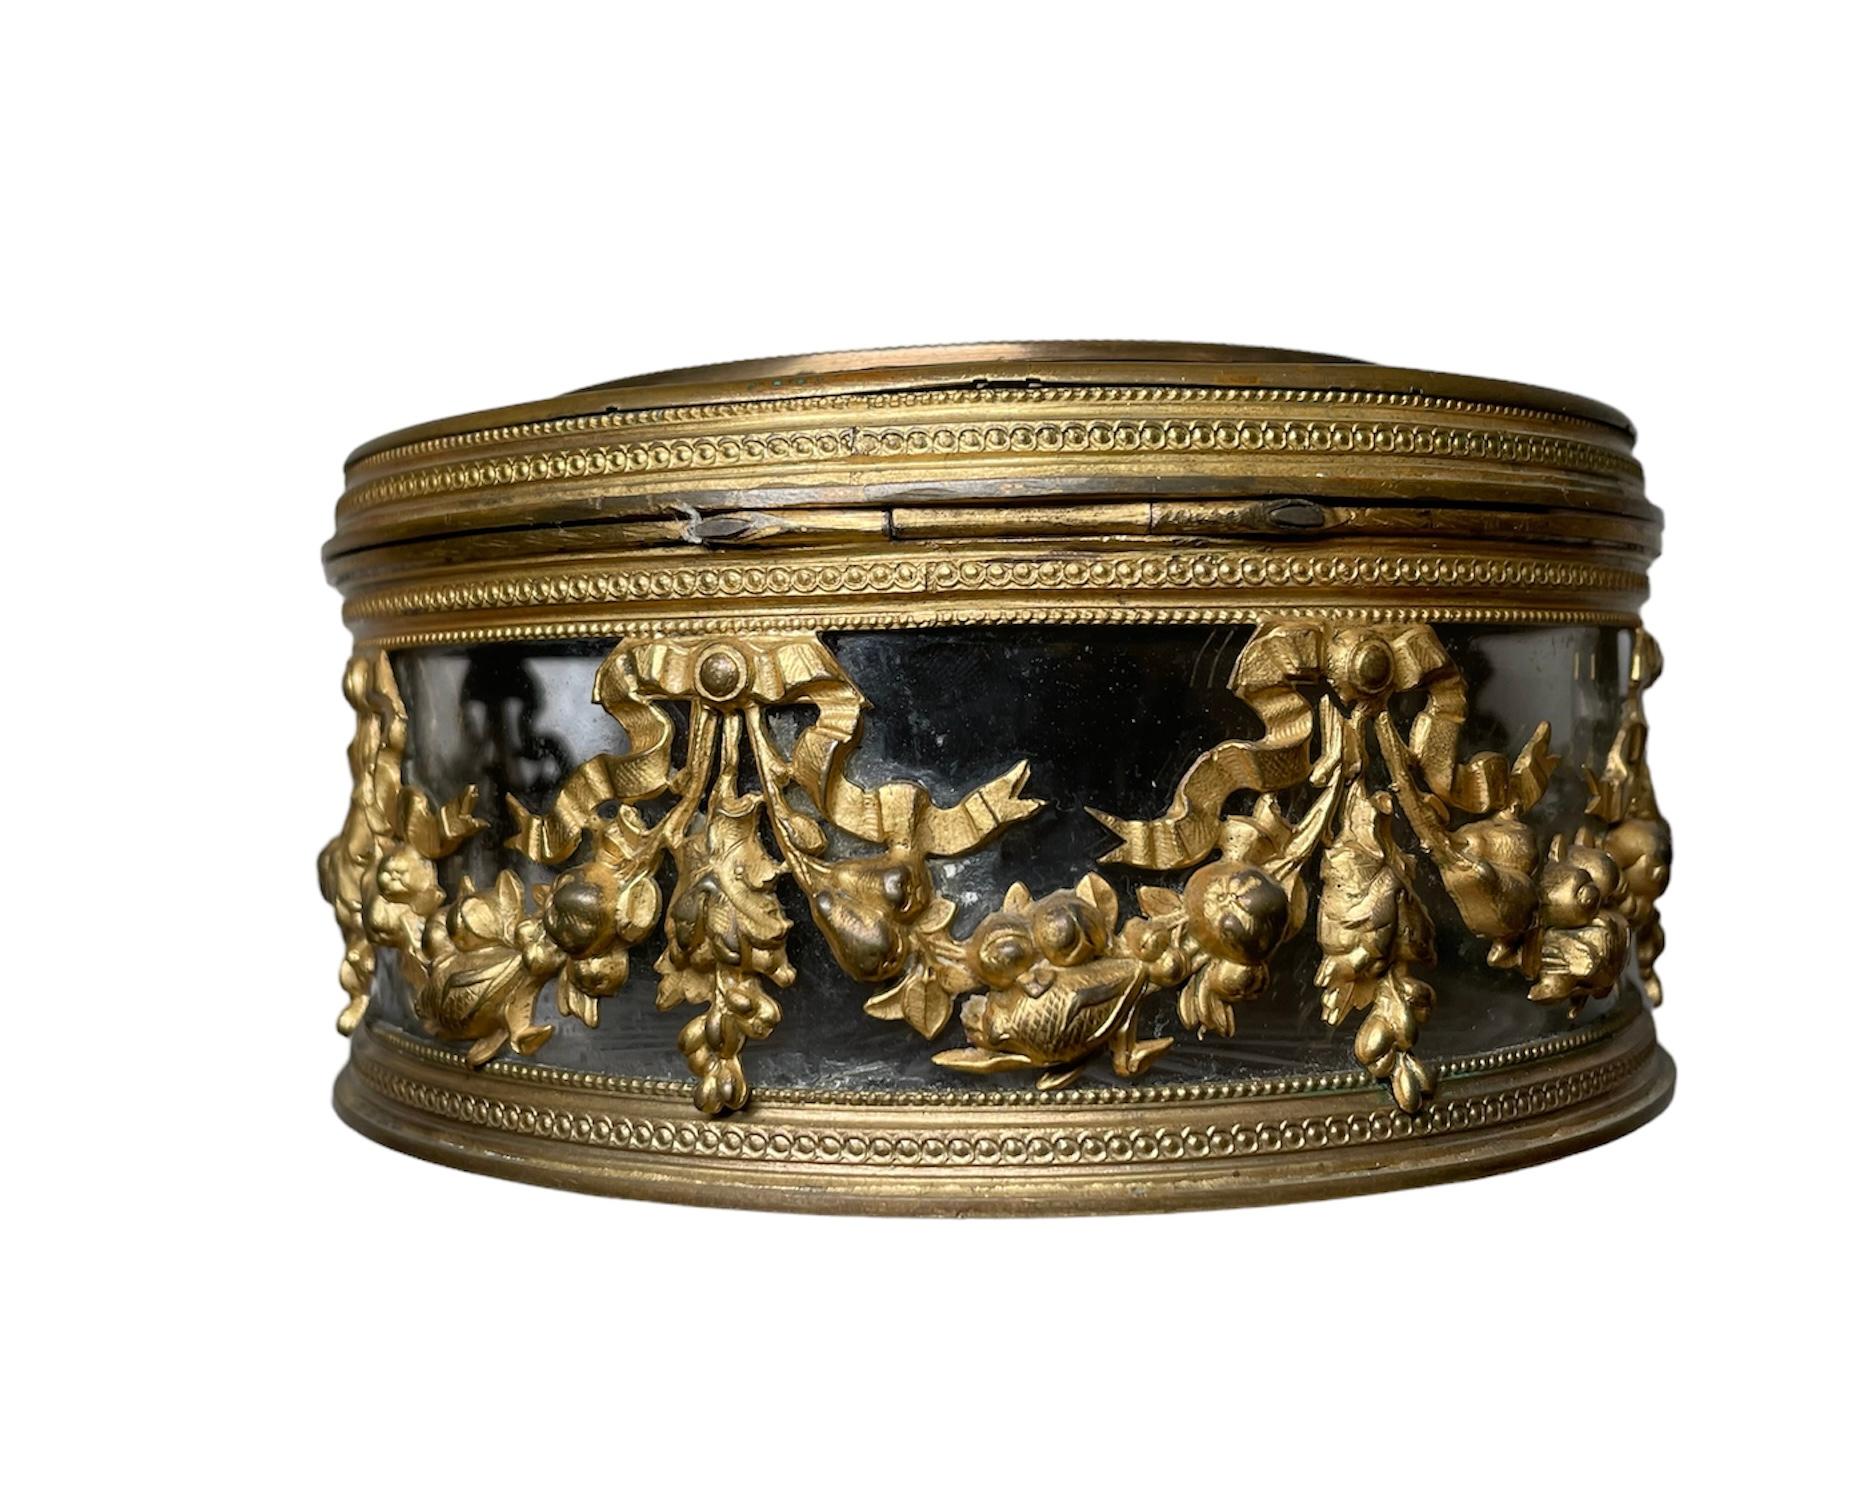 This is a French bronze metal overlay round powder glass jar/box. It depicts a hinged lidded glass jar decorated with a long gilt garland of bows and flowers and some fine beads. The lid is also adorned with the same, but it is enhanced with a hand